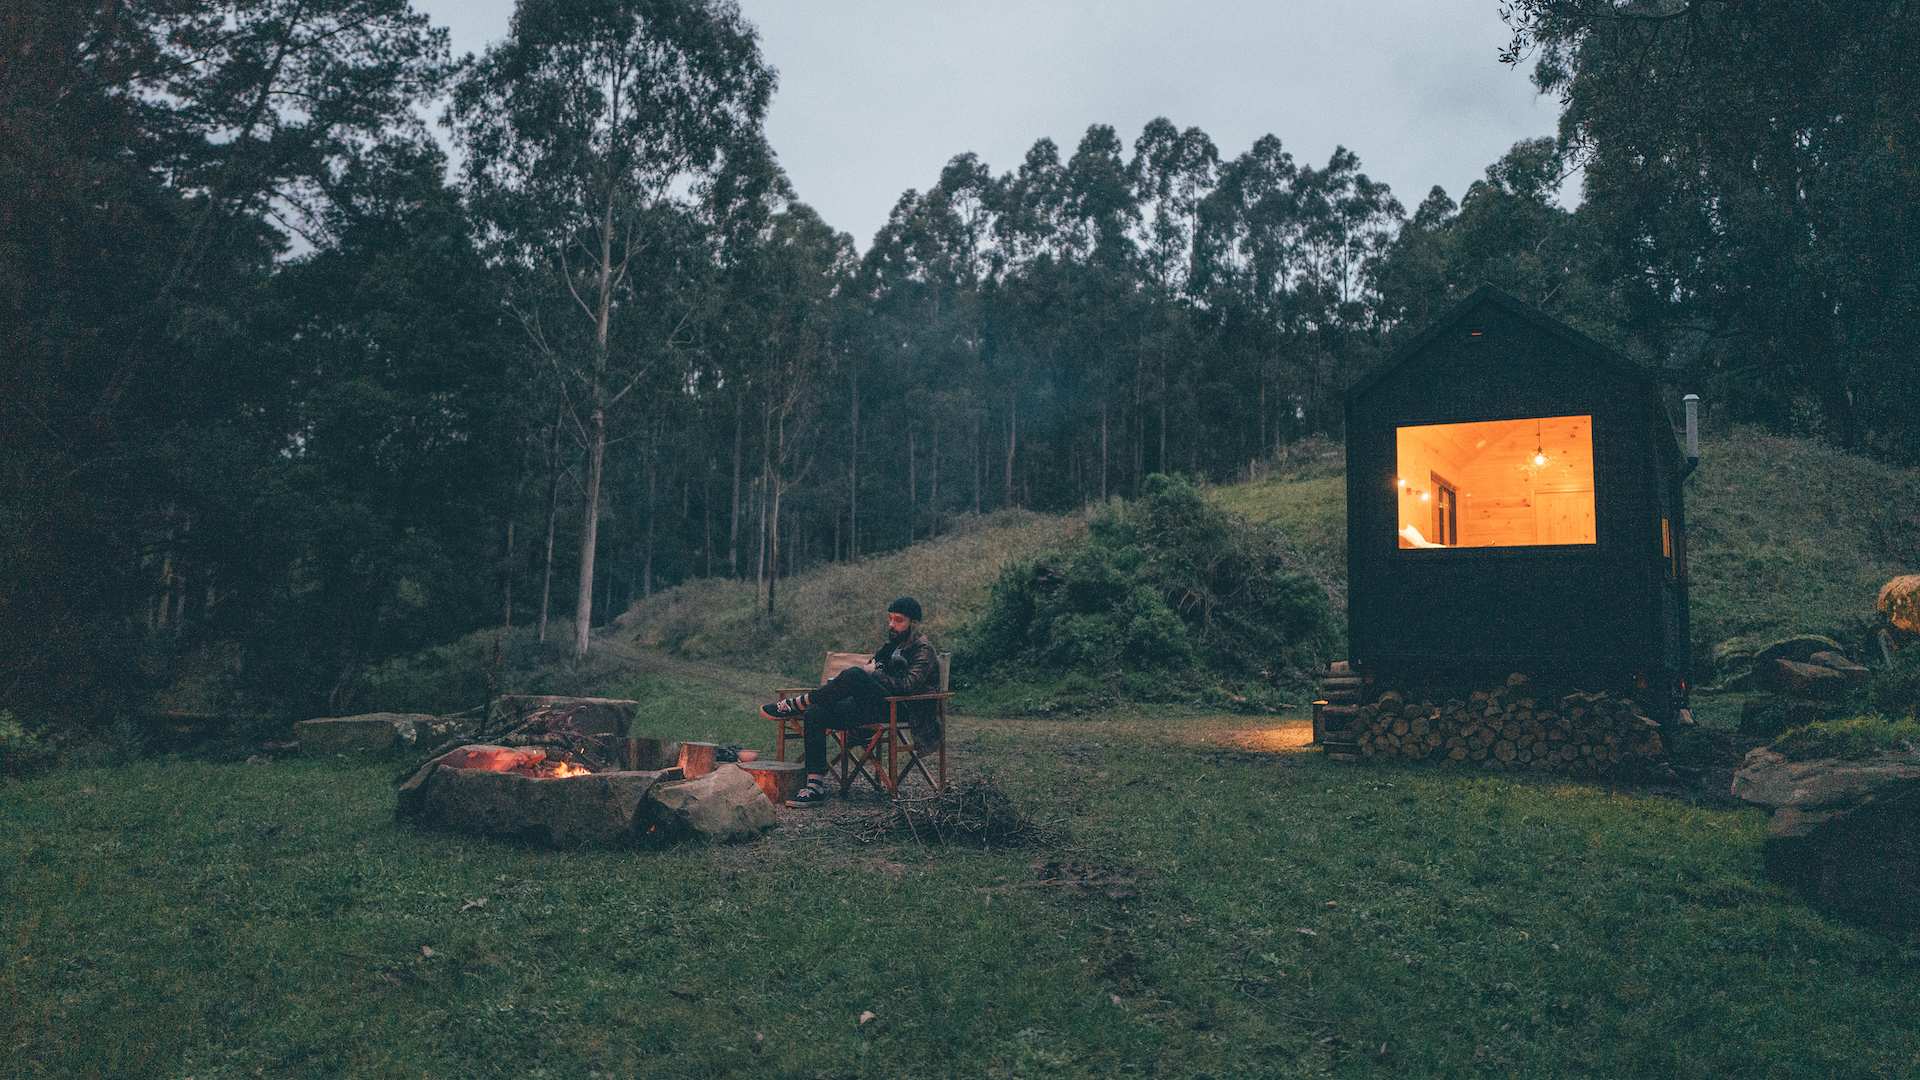 We're Giving You the Chance to Live an Unyoked Life with Off-Grid Escapes Every Three Months